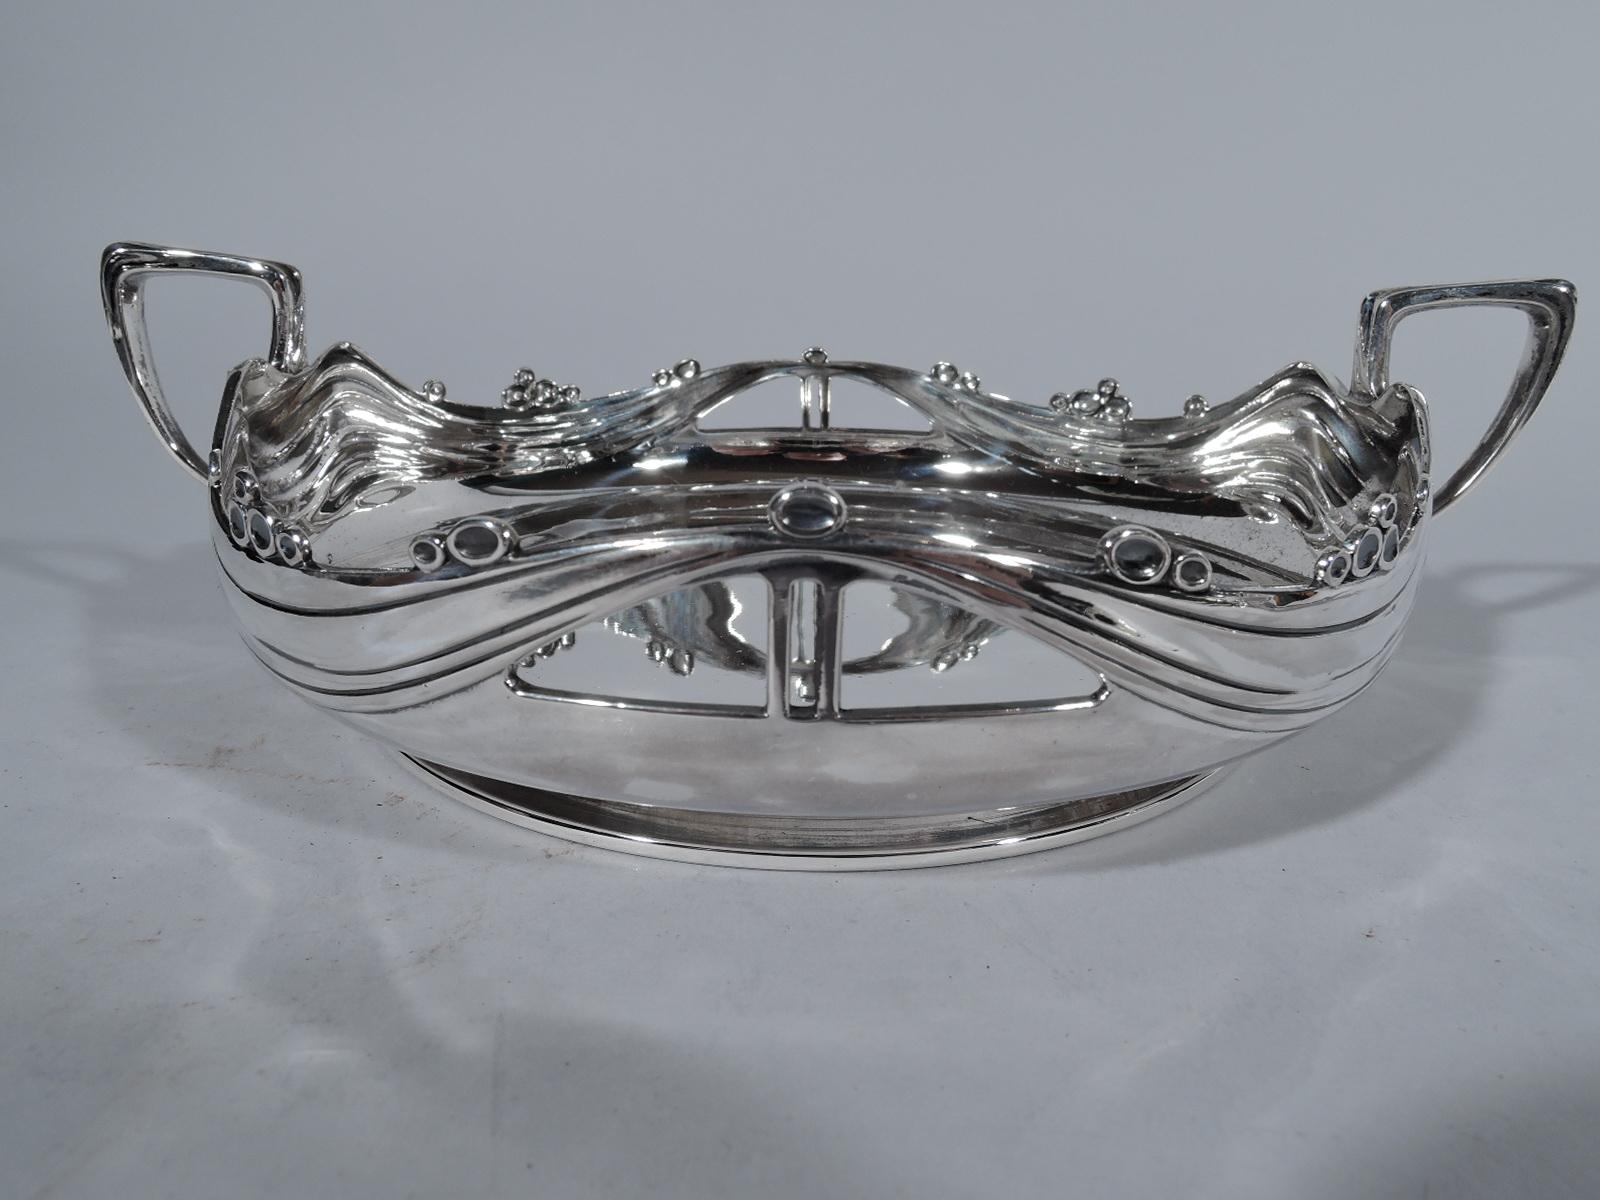 German Jugendstil sterling silver bowl. Round with wavy sides and open lunettes propped up tent-style with double poles. Sides have tooled wavy lines and dot clusters are applied to rim. Scroll-bracket side handles. Short foot. Hallmarked. Heavy